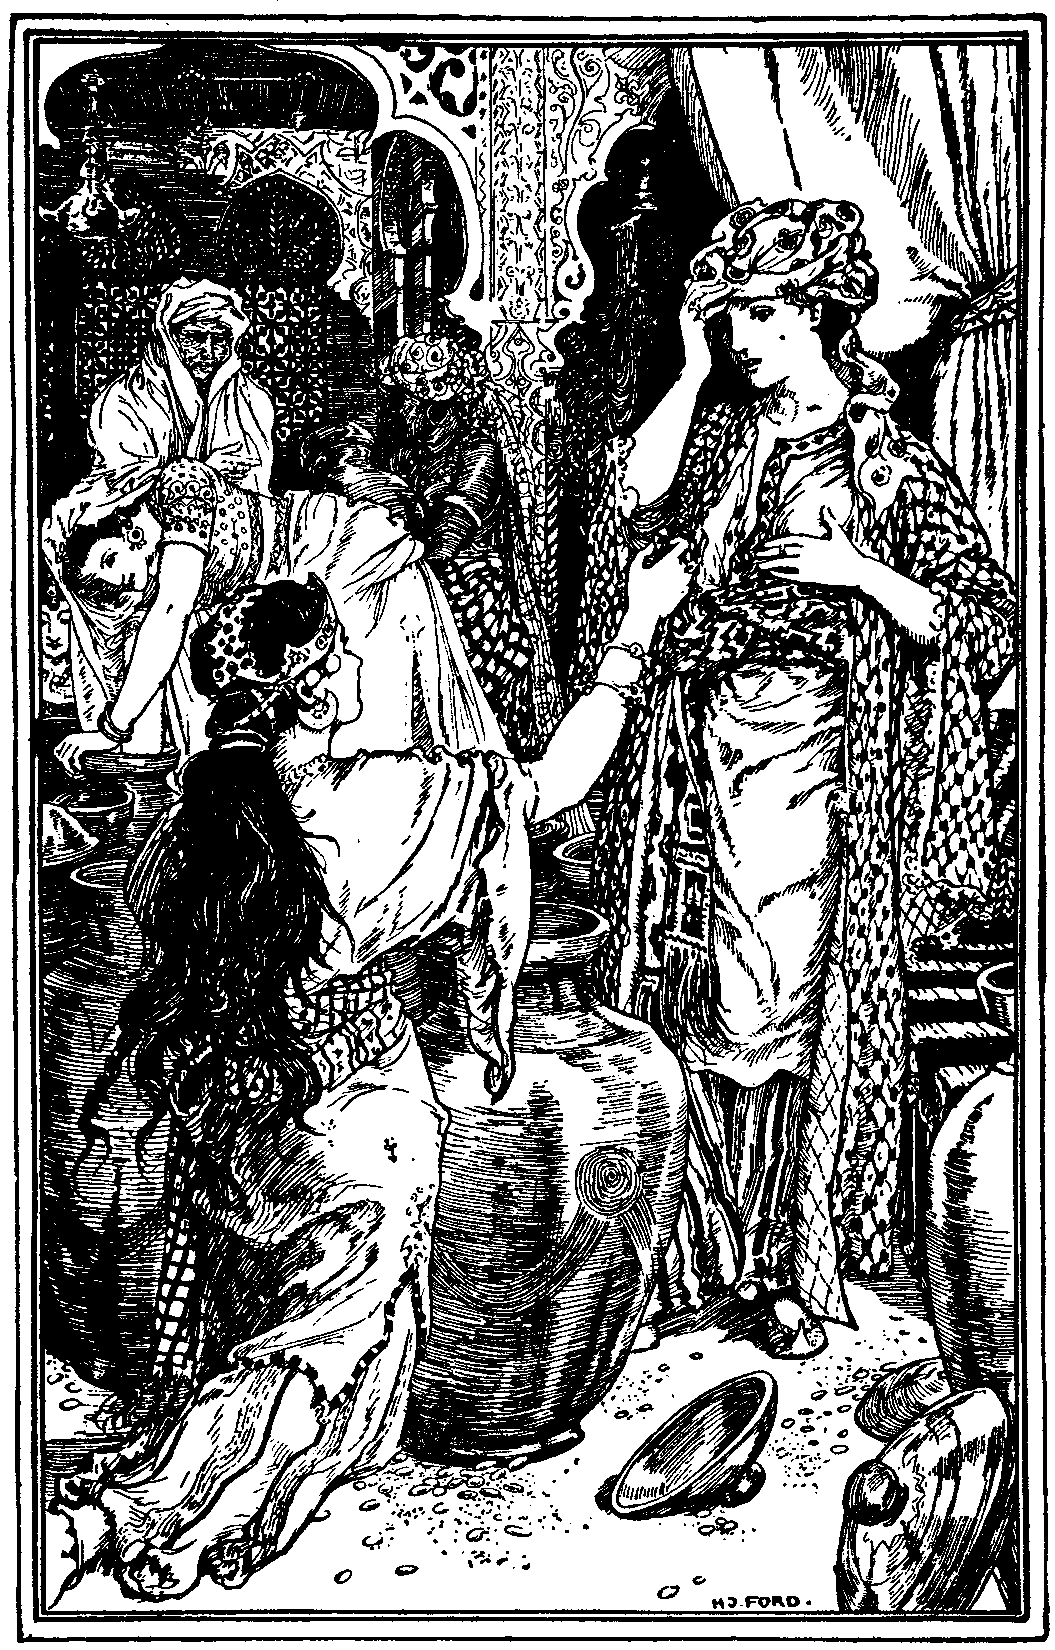 [Frontispiece] from The Arabian Nights by Andrew Lang